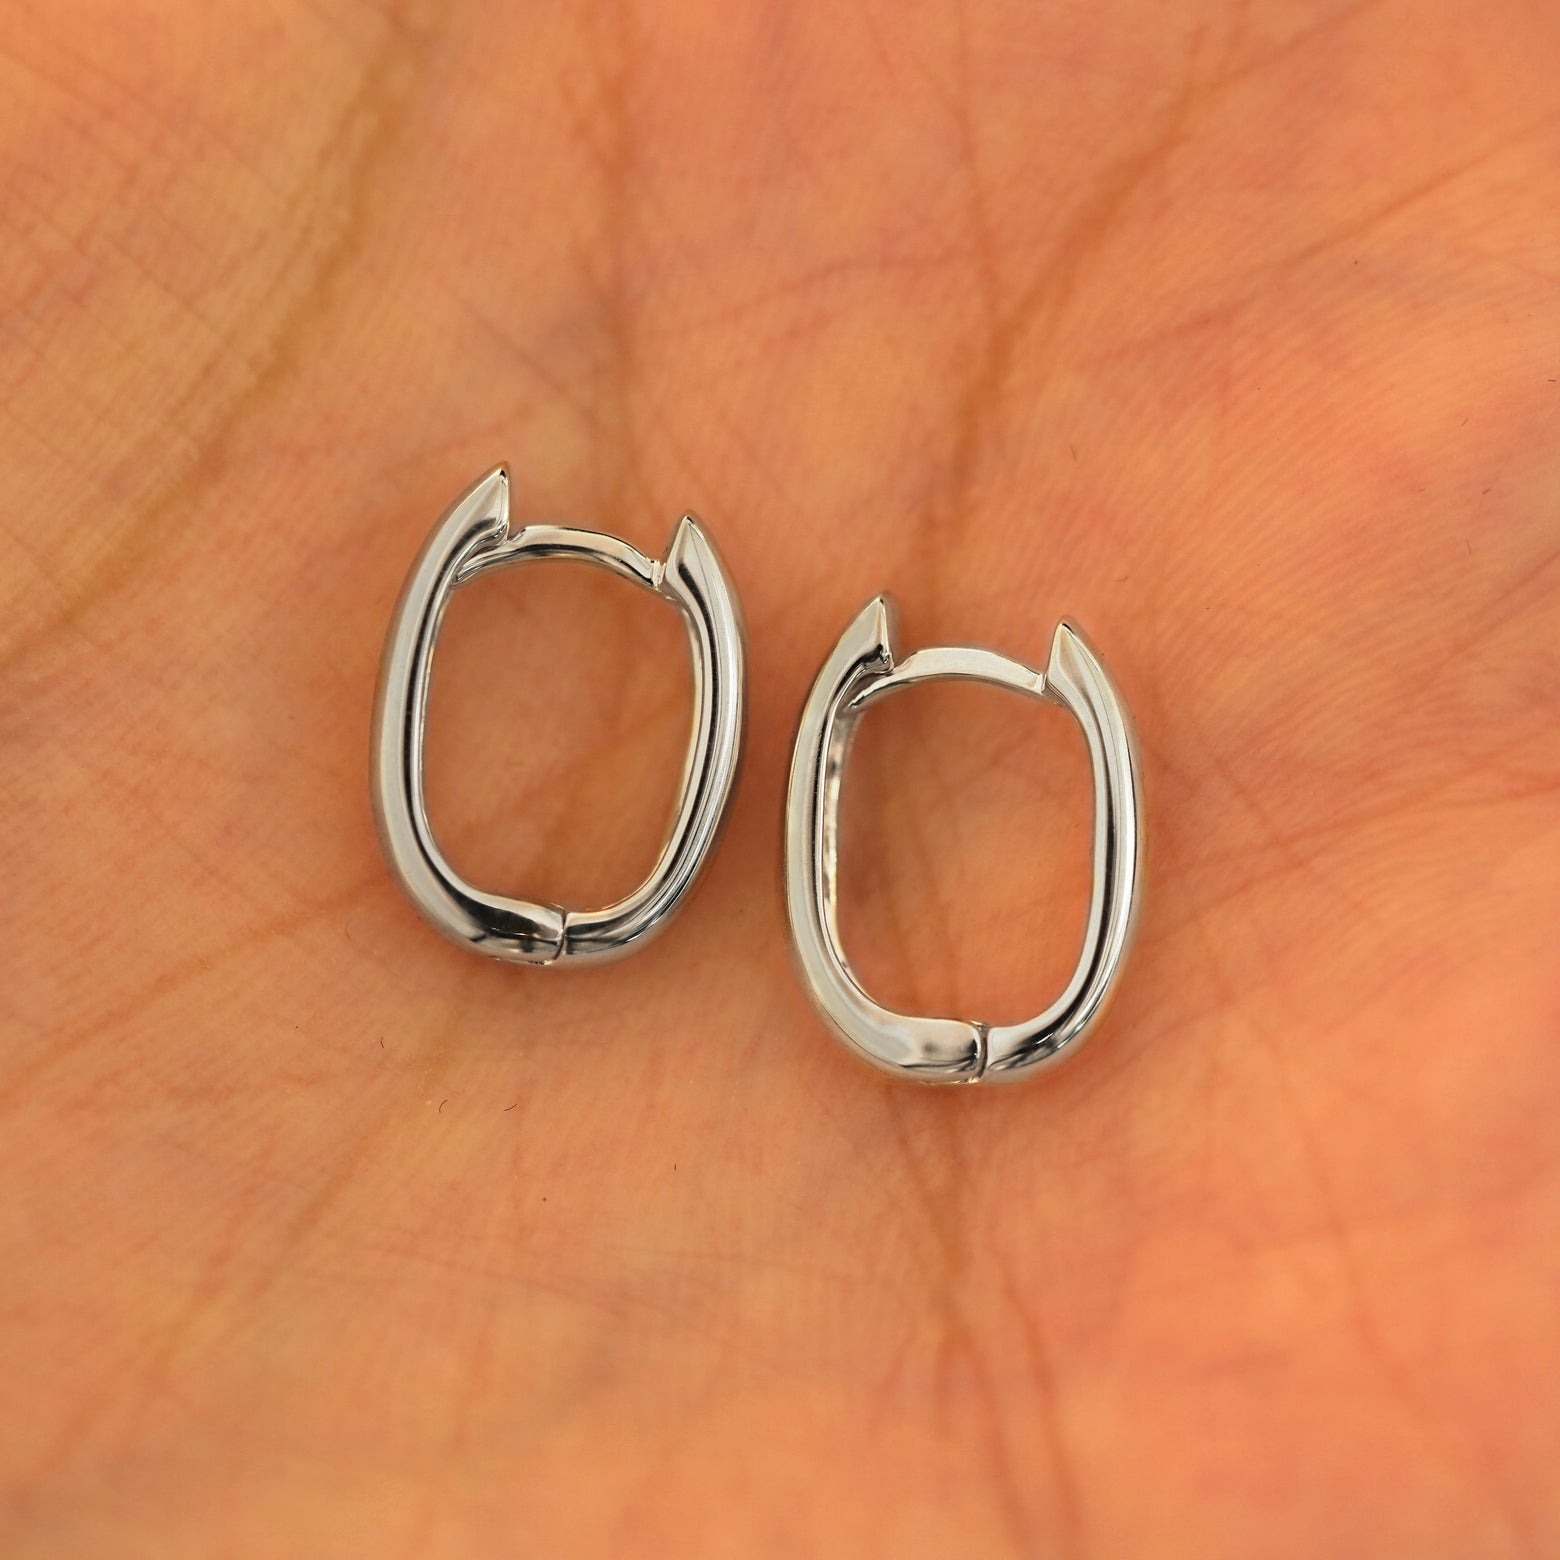 A pair of 14k white gold Thick Oval Huggie Hoops resting in a model's palm